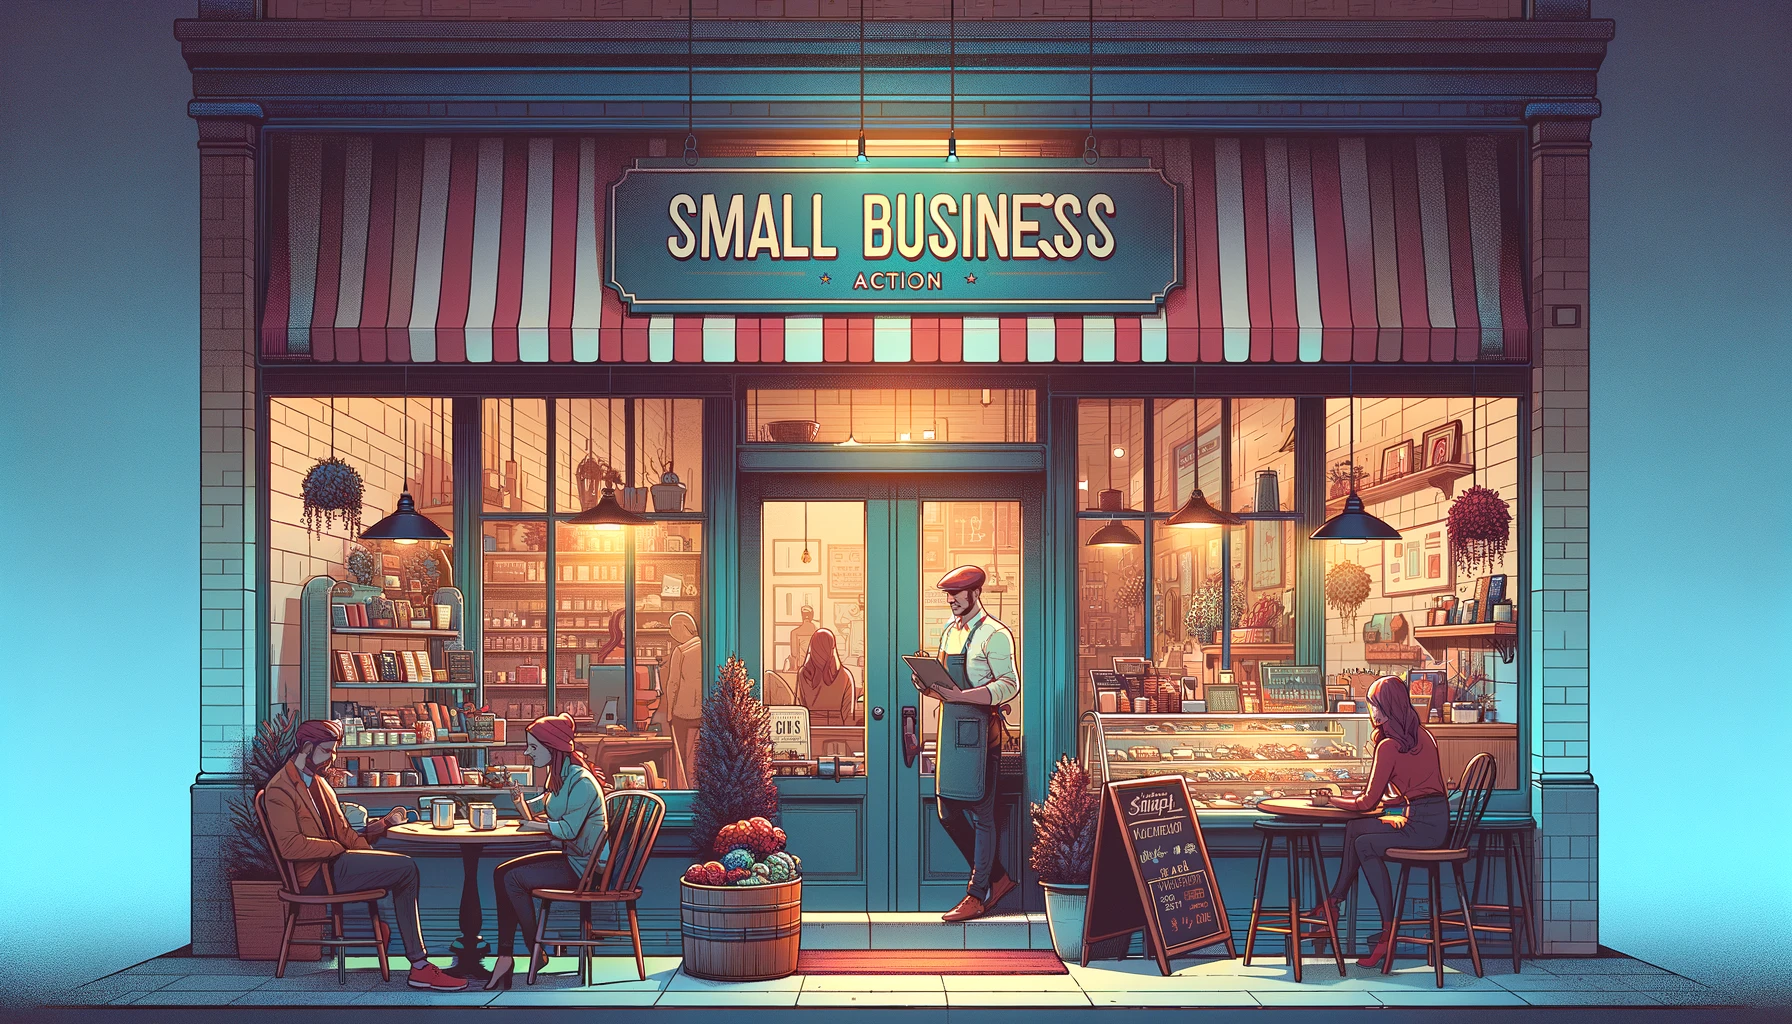 The image showcases a vibrant and cozy small business scene, featuring a storefront with a welcoming sign and an interior where an owner engages with customers, highlighting the warmth, community, and entrepreneurial spirit characteristic of small enterprises